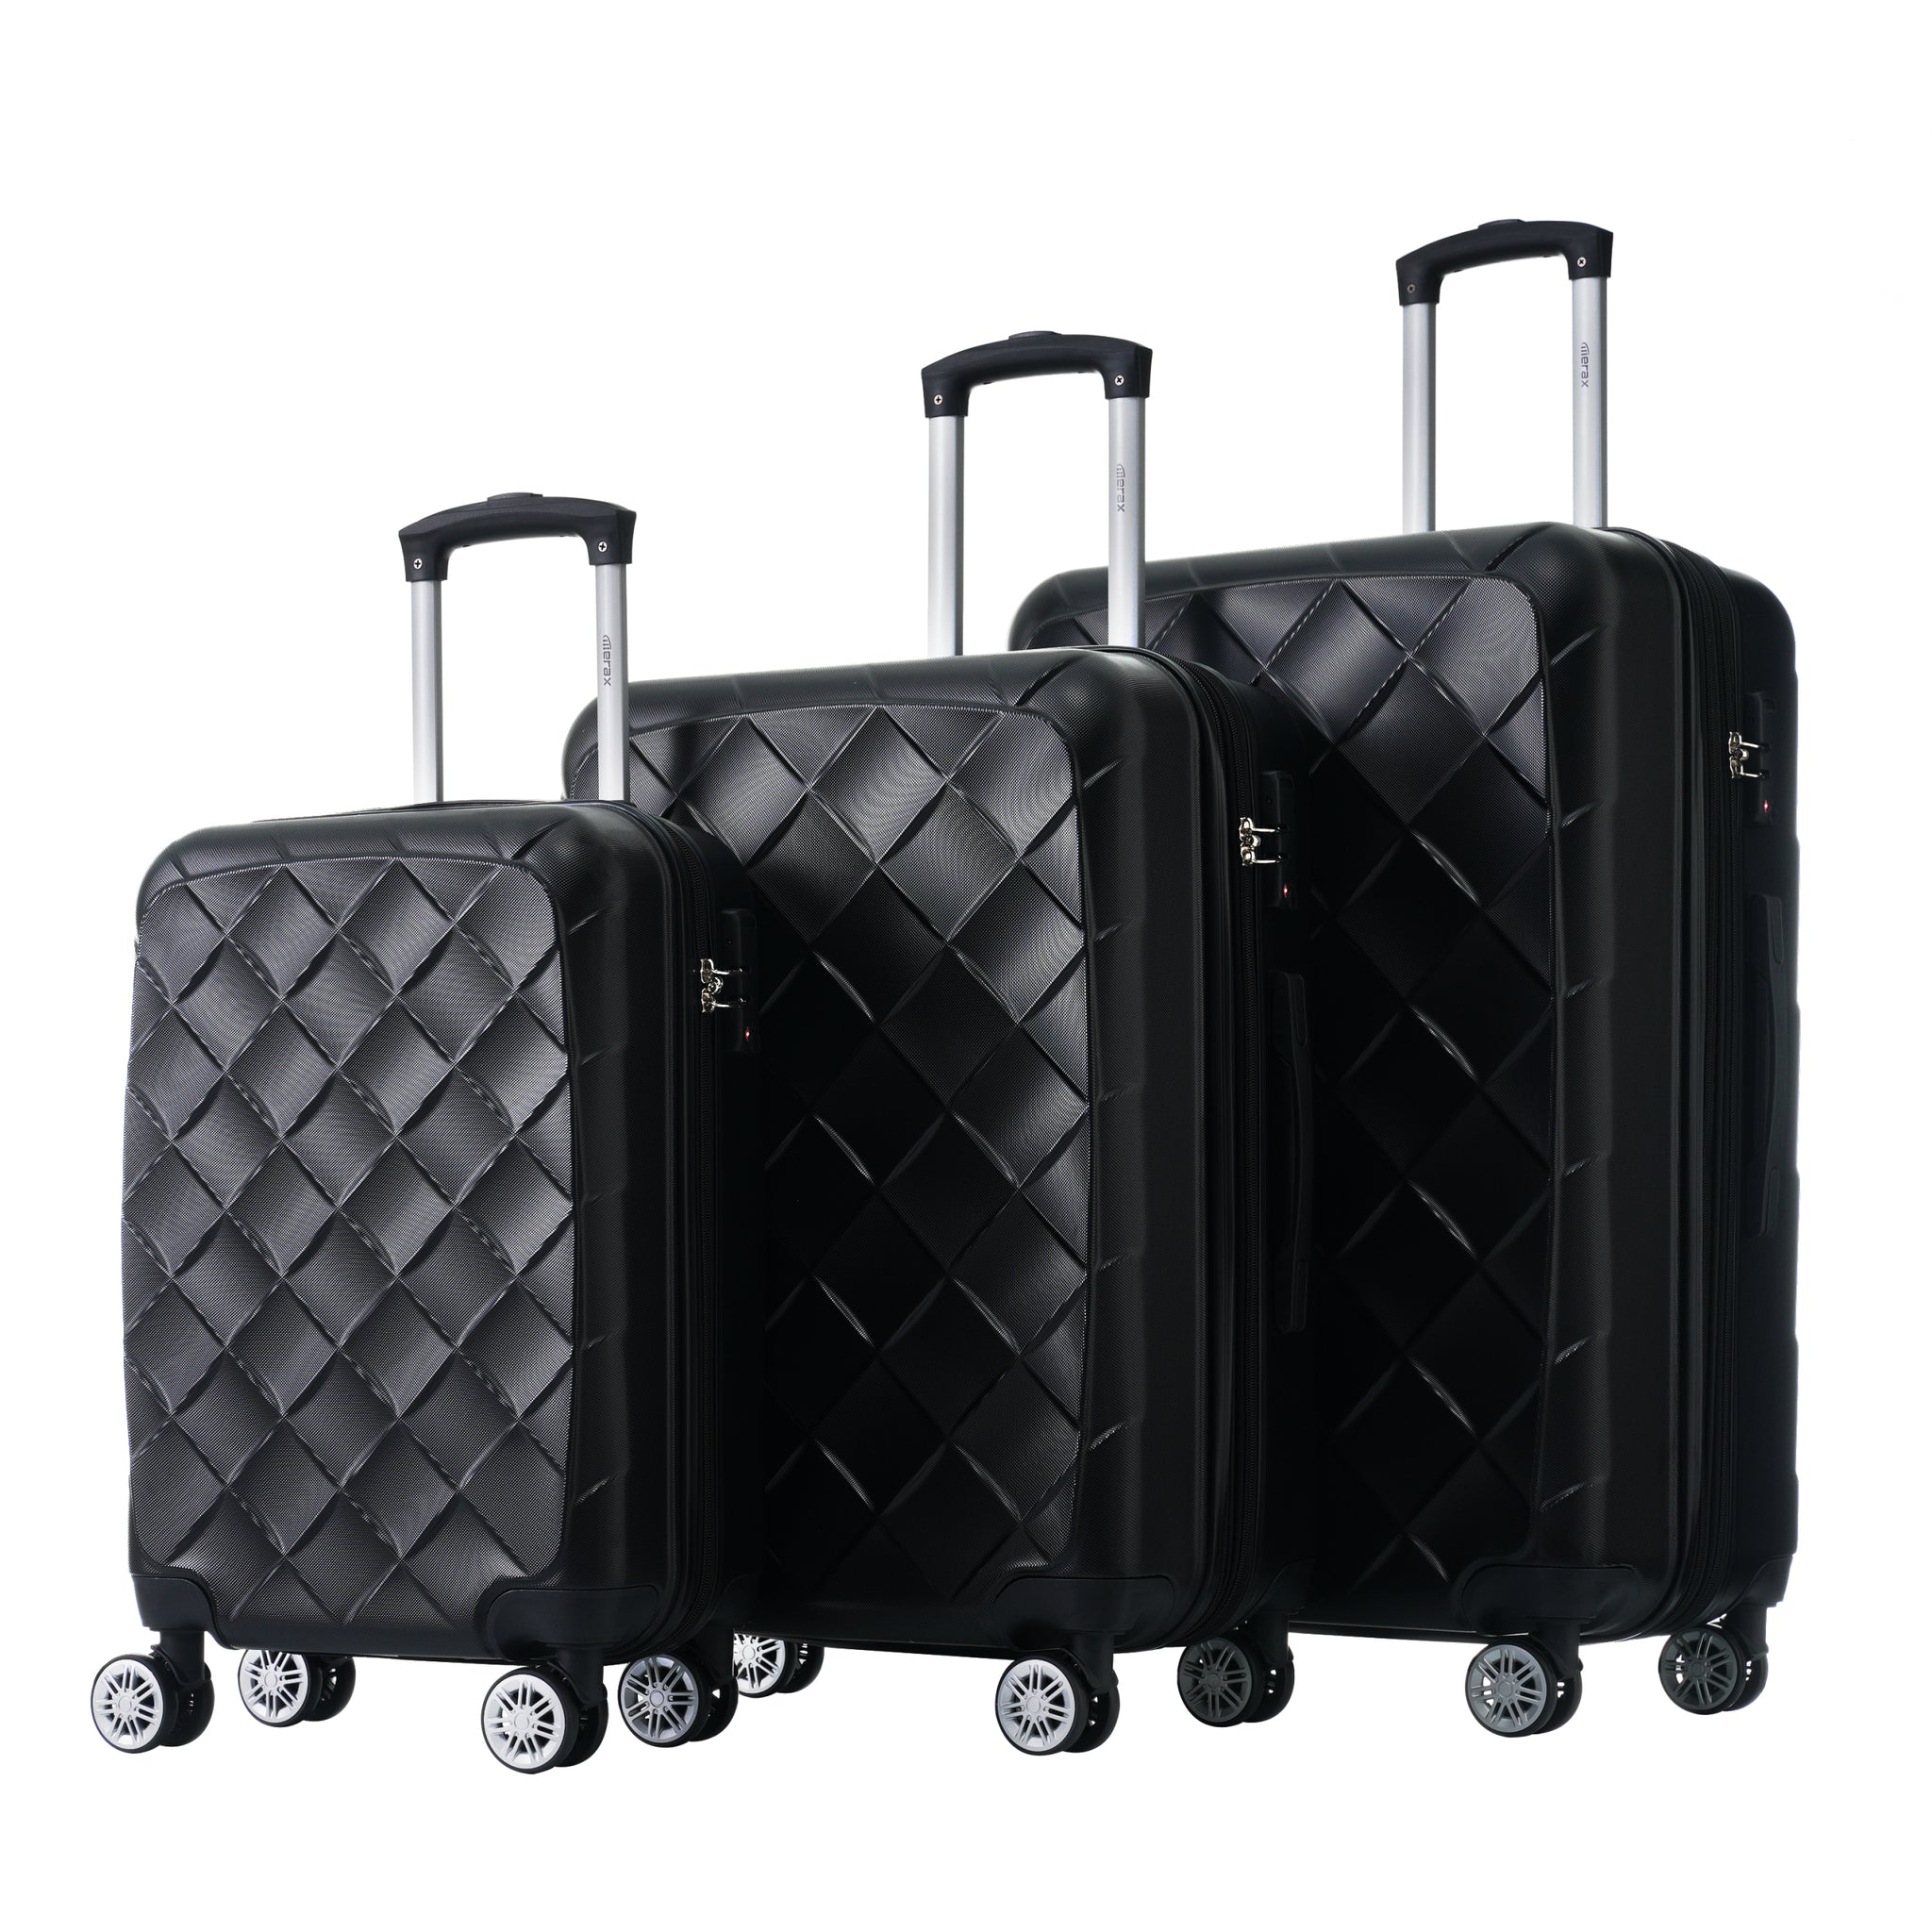 3 Piece Luggage Set Suitcase Set, ABS Hard Shell black-abs